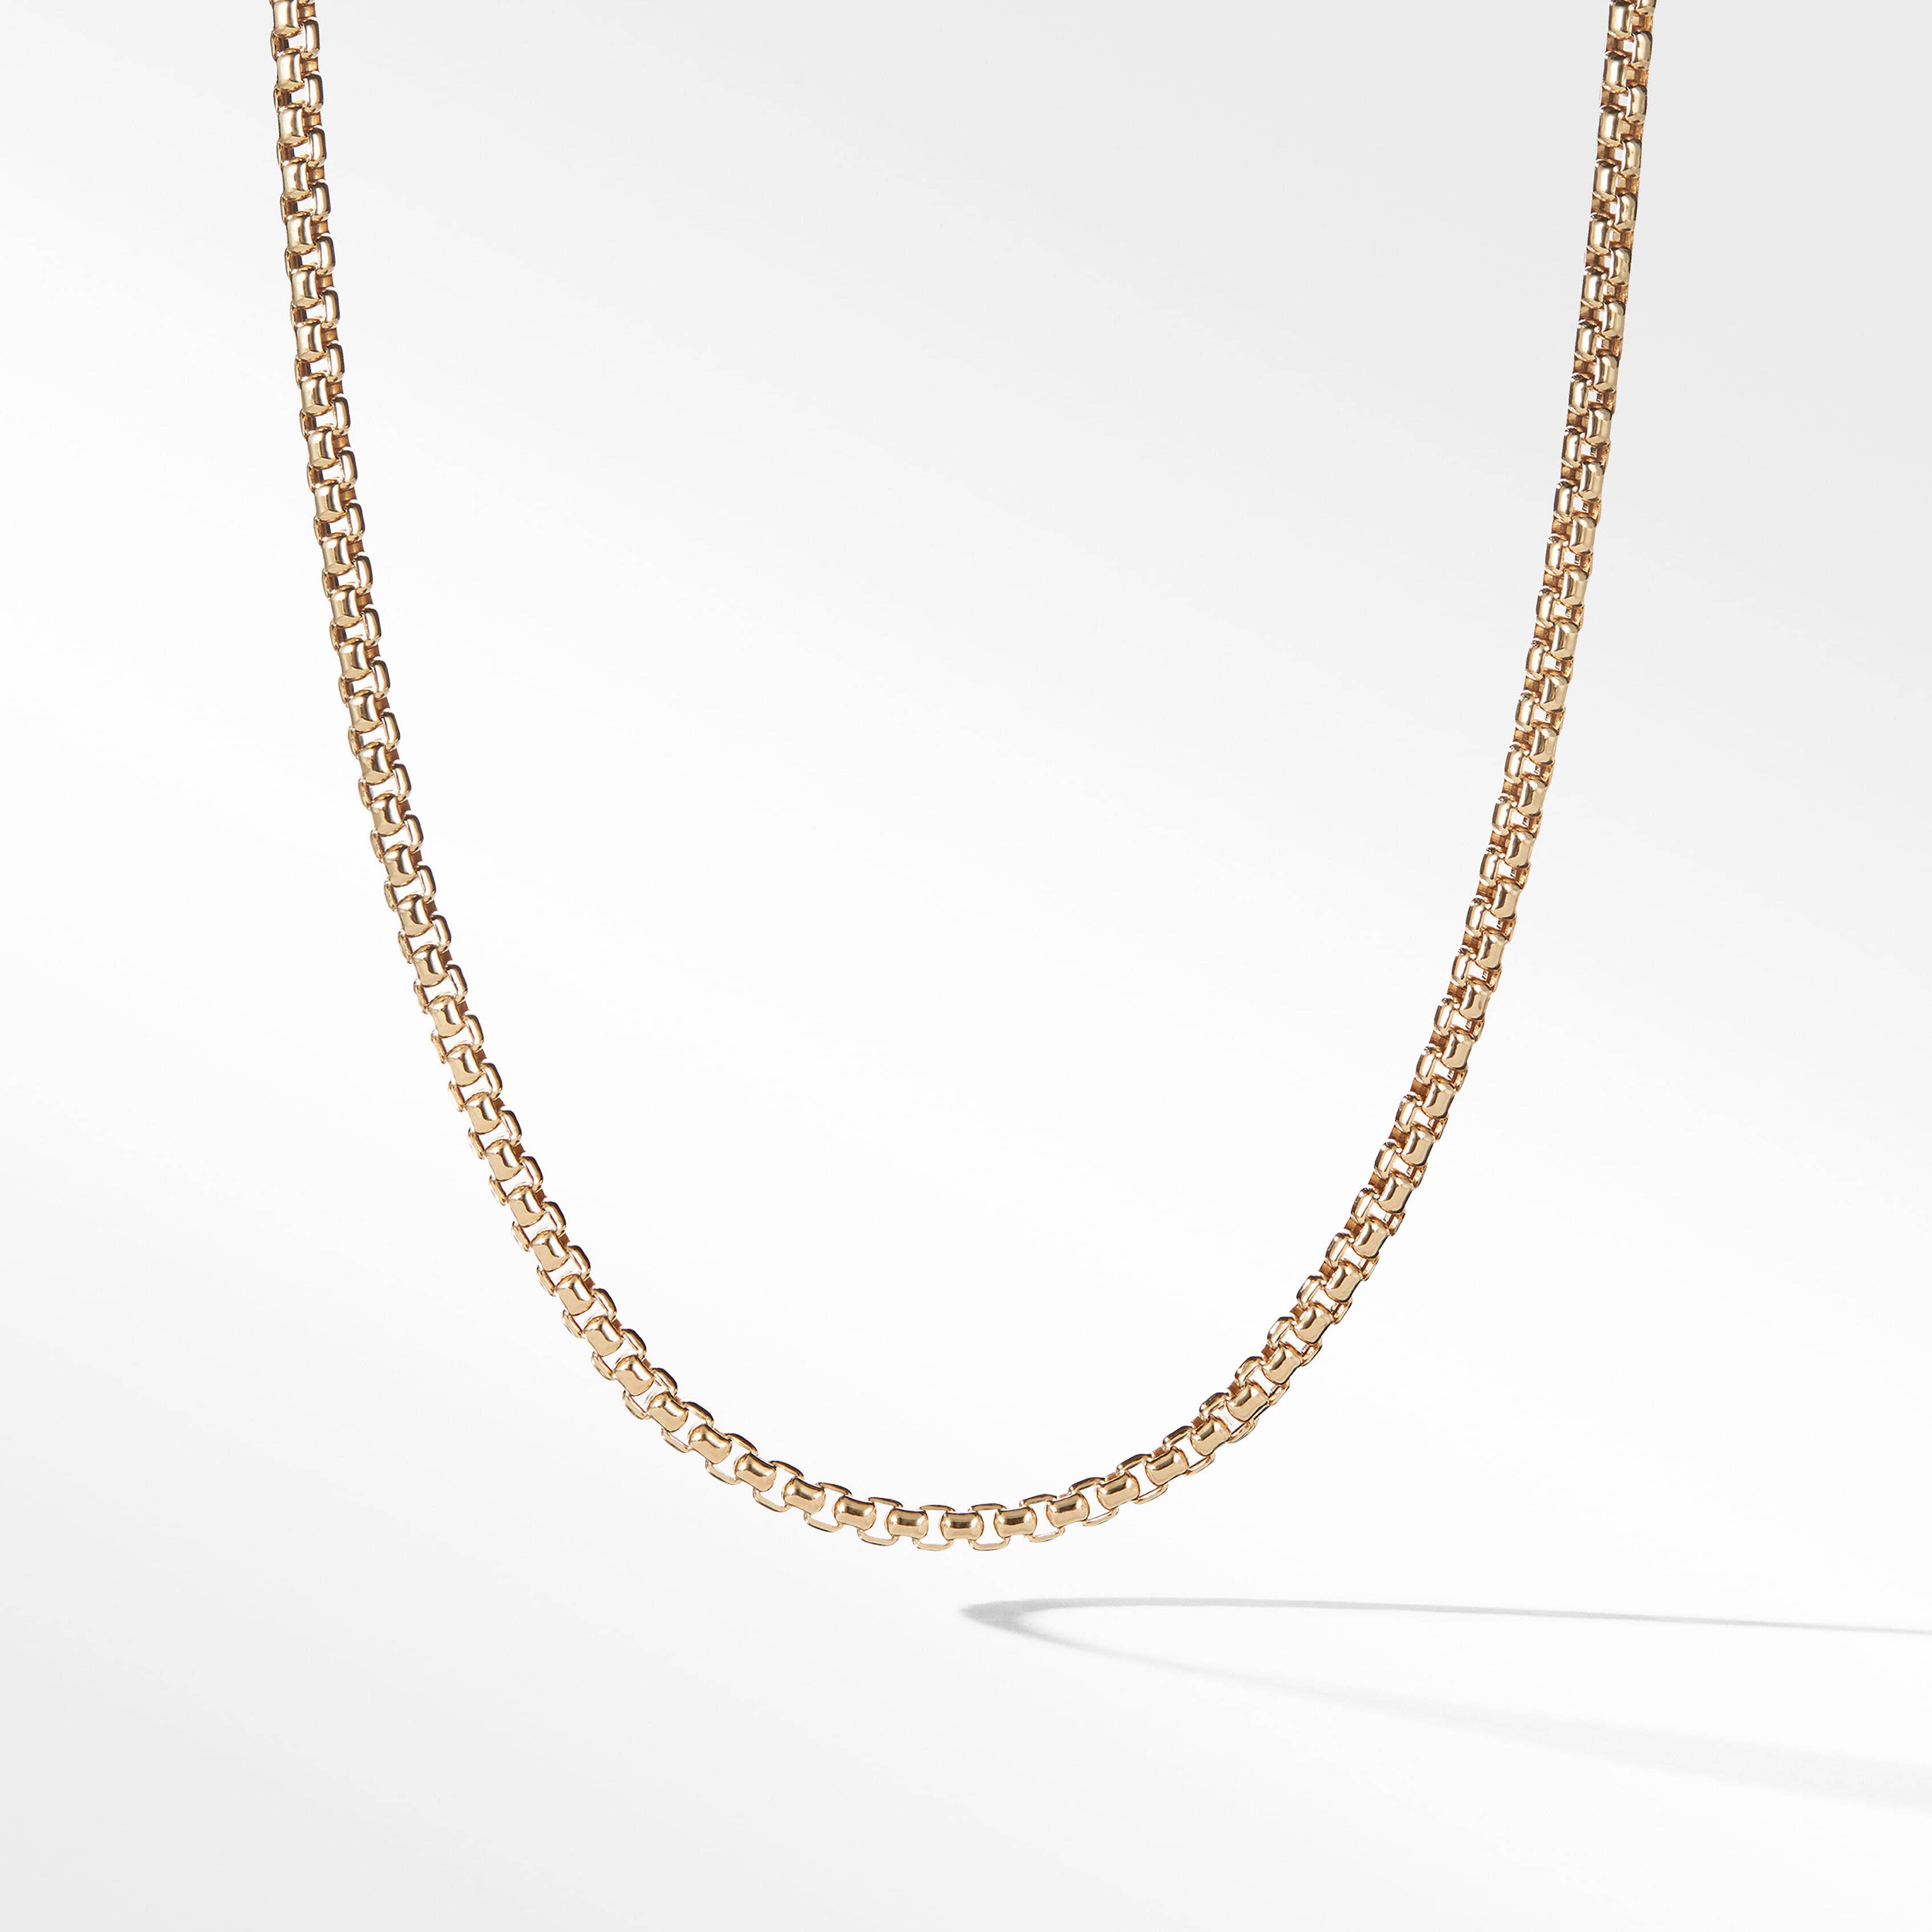 Box Chain Necklace in 18K Yellow Gold, 2.7mm